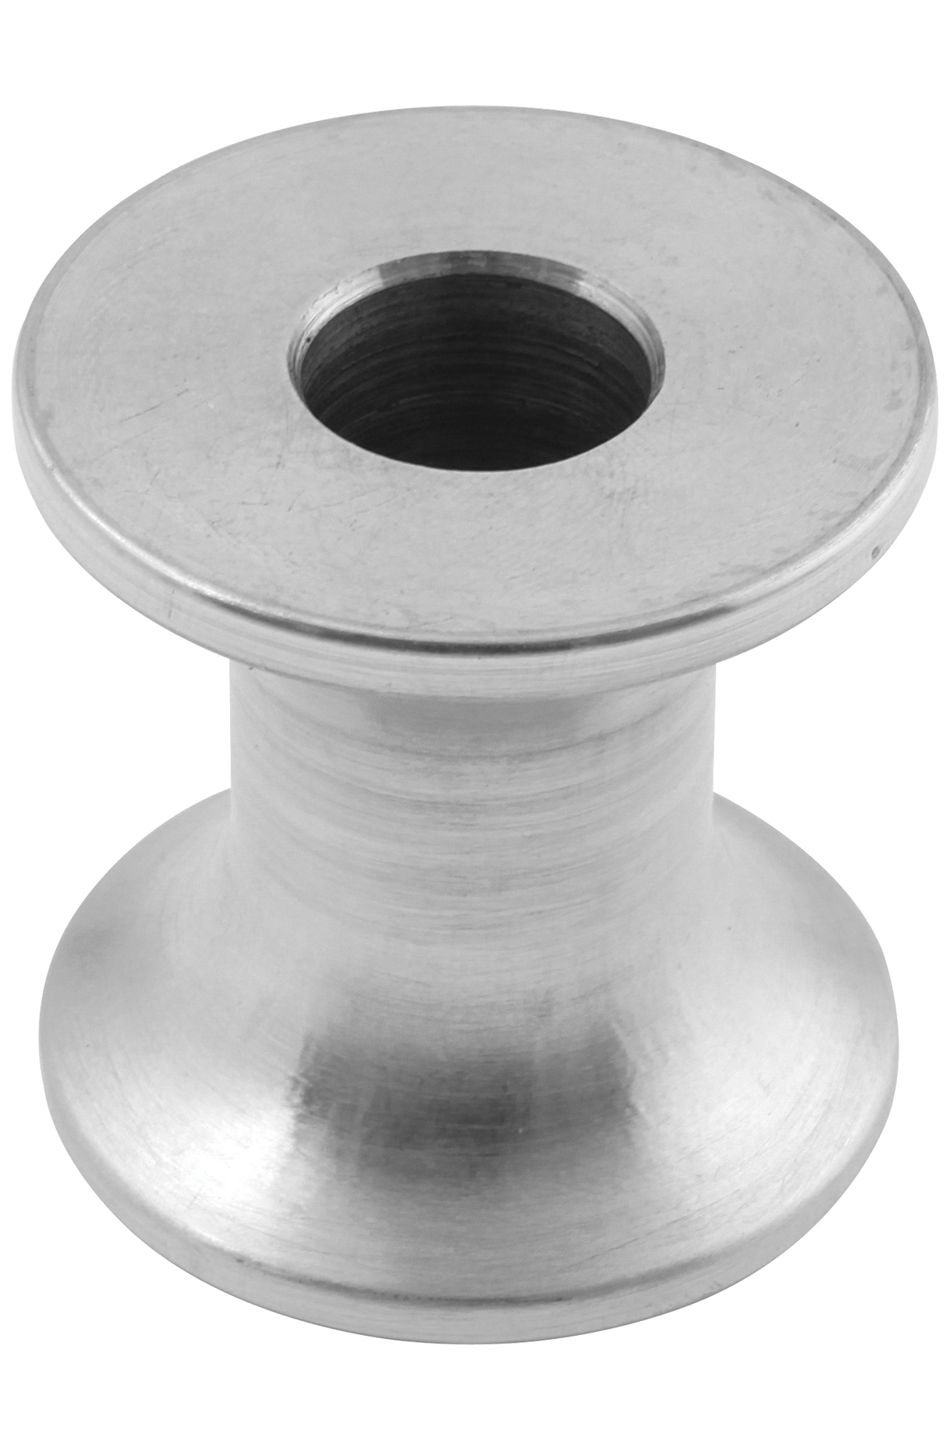 Allstar Performance 18623-10 Motor Mount Spacer, 1-1/2 in Tall, 1/2 in ID, 1-1/2 in OD, Aluminum, Natural, Set of 10